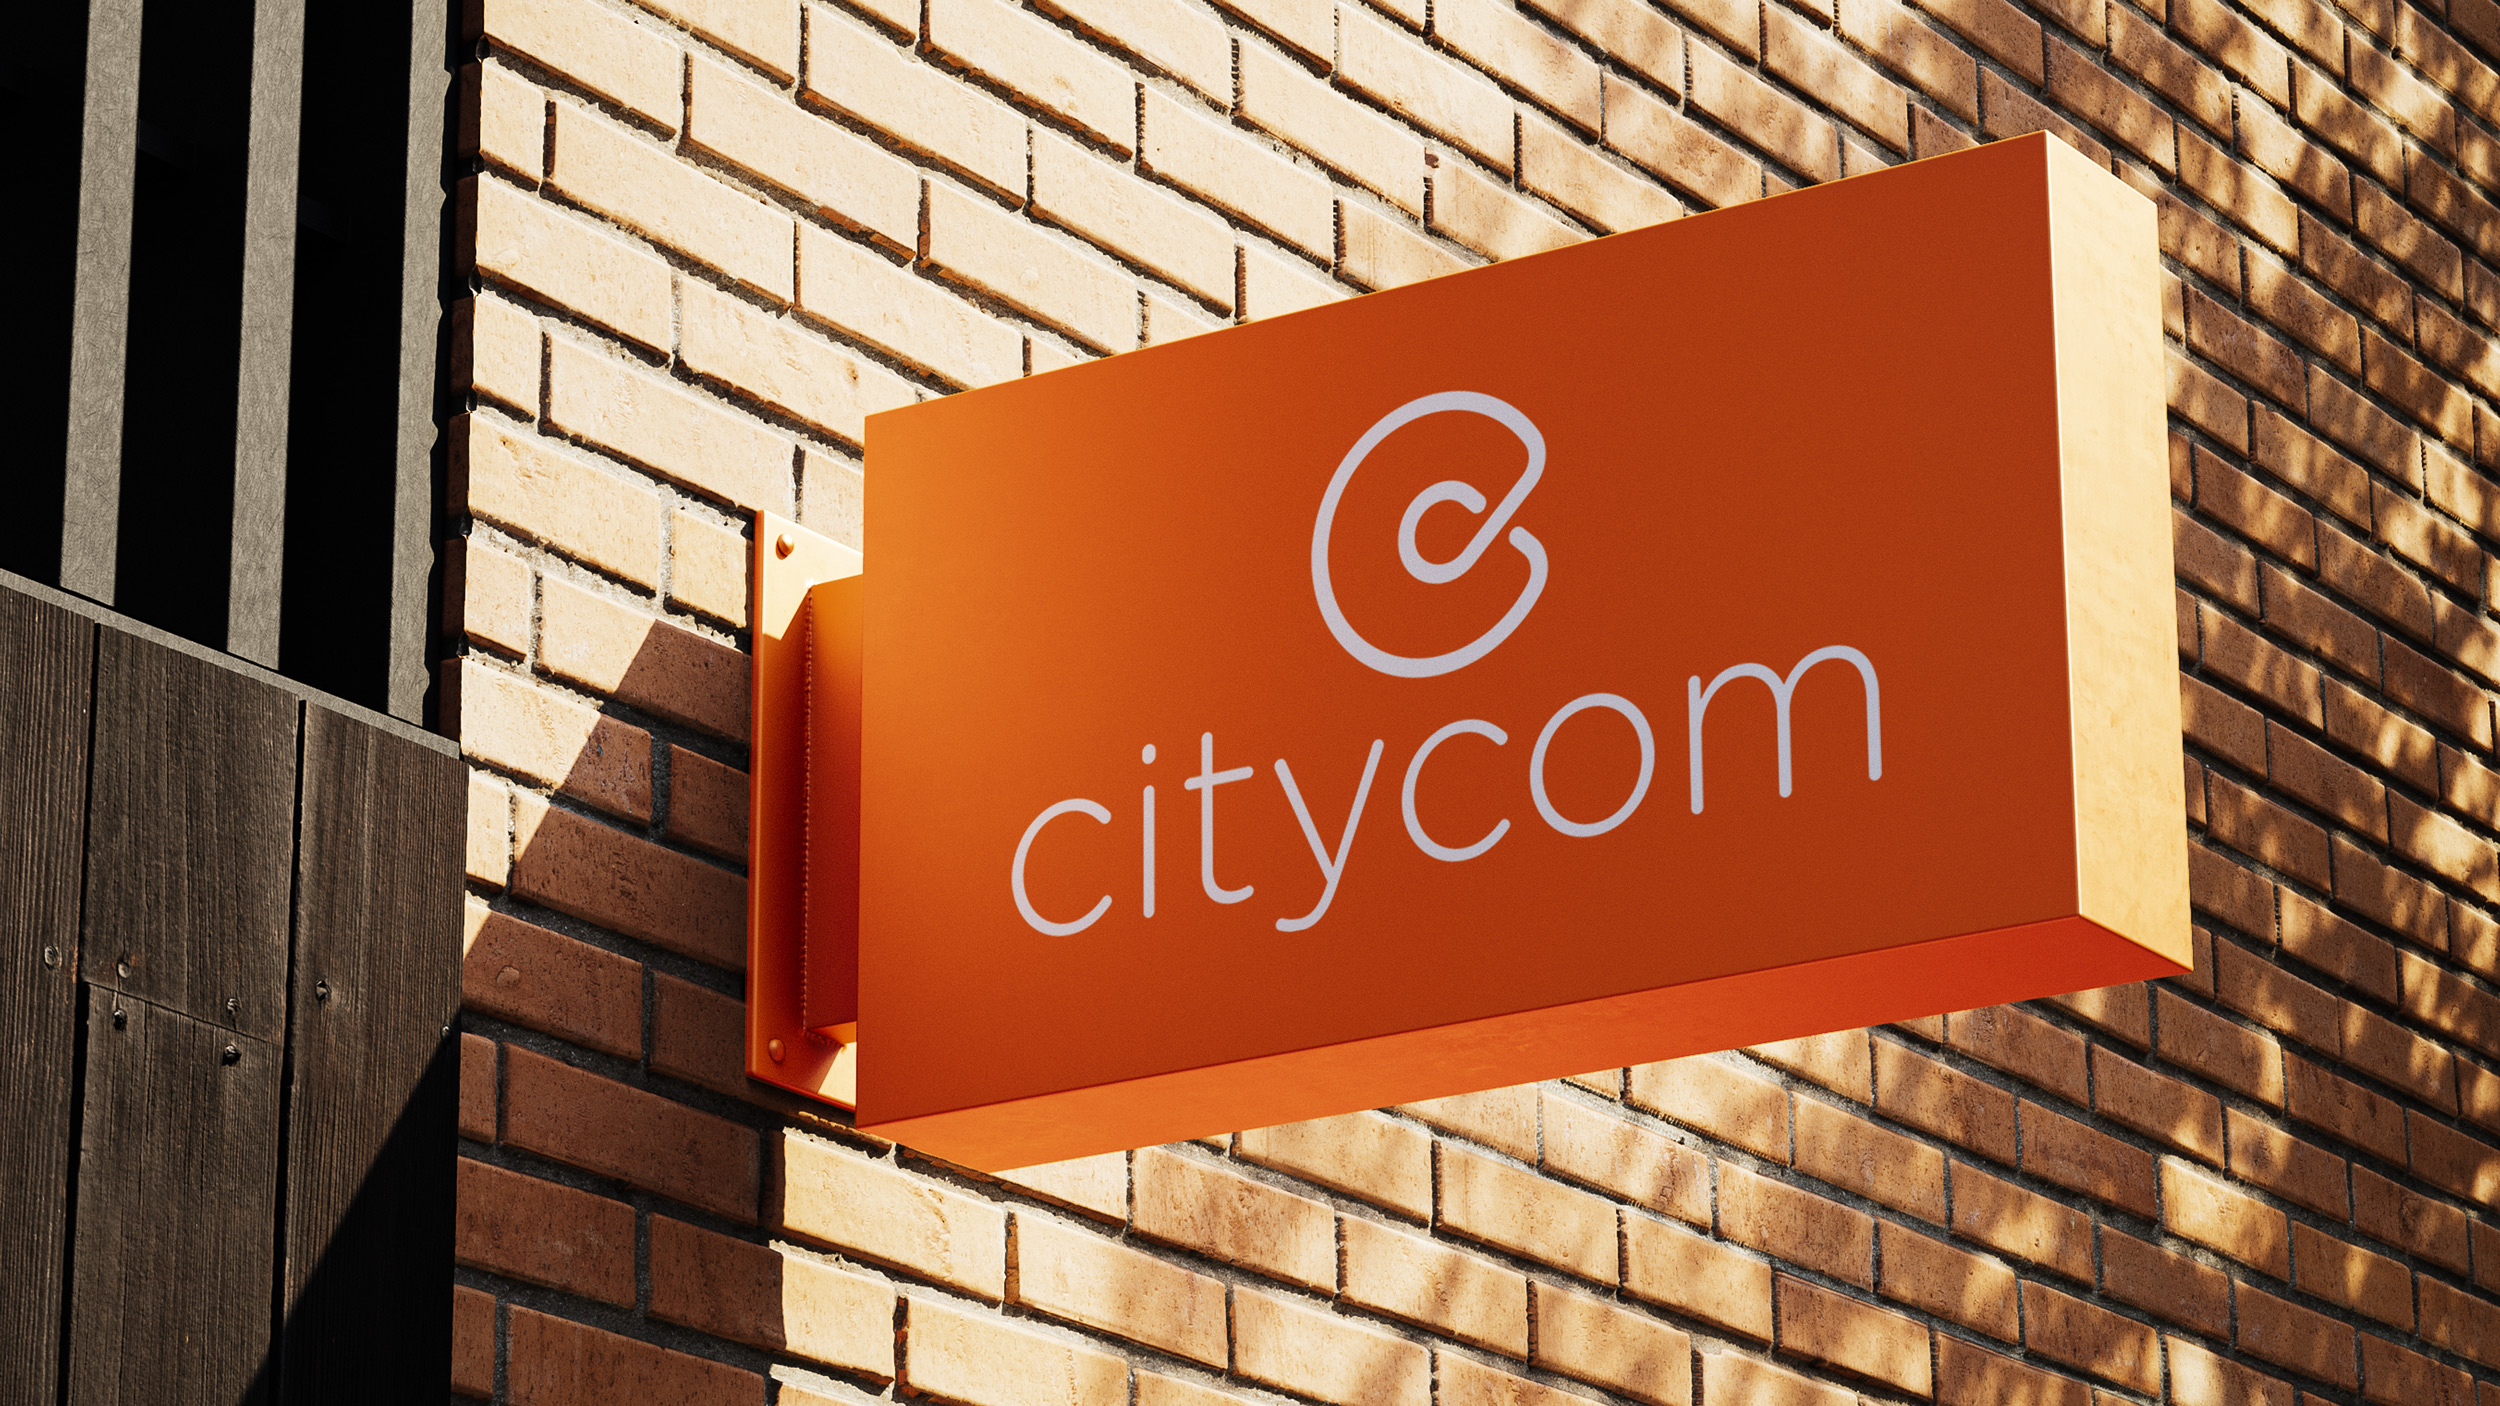 Citycom sign on the side of a brick building